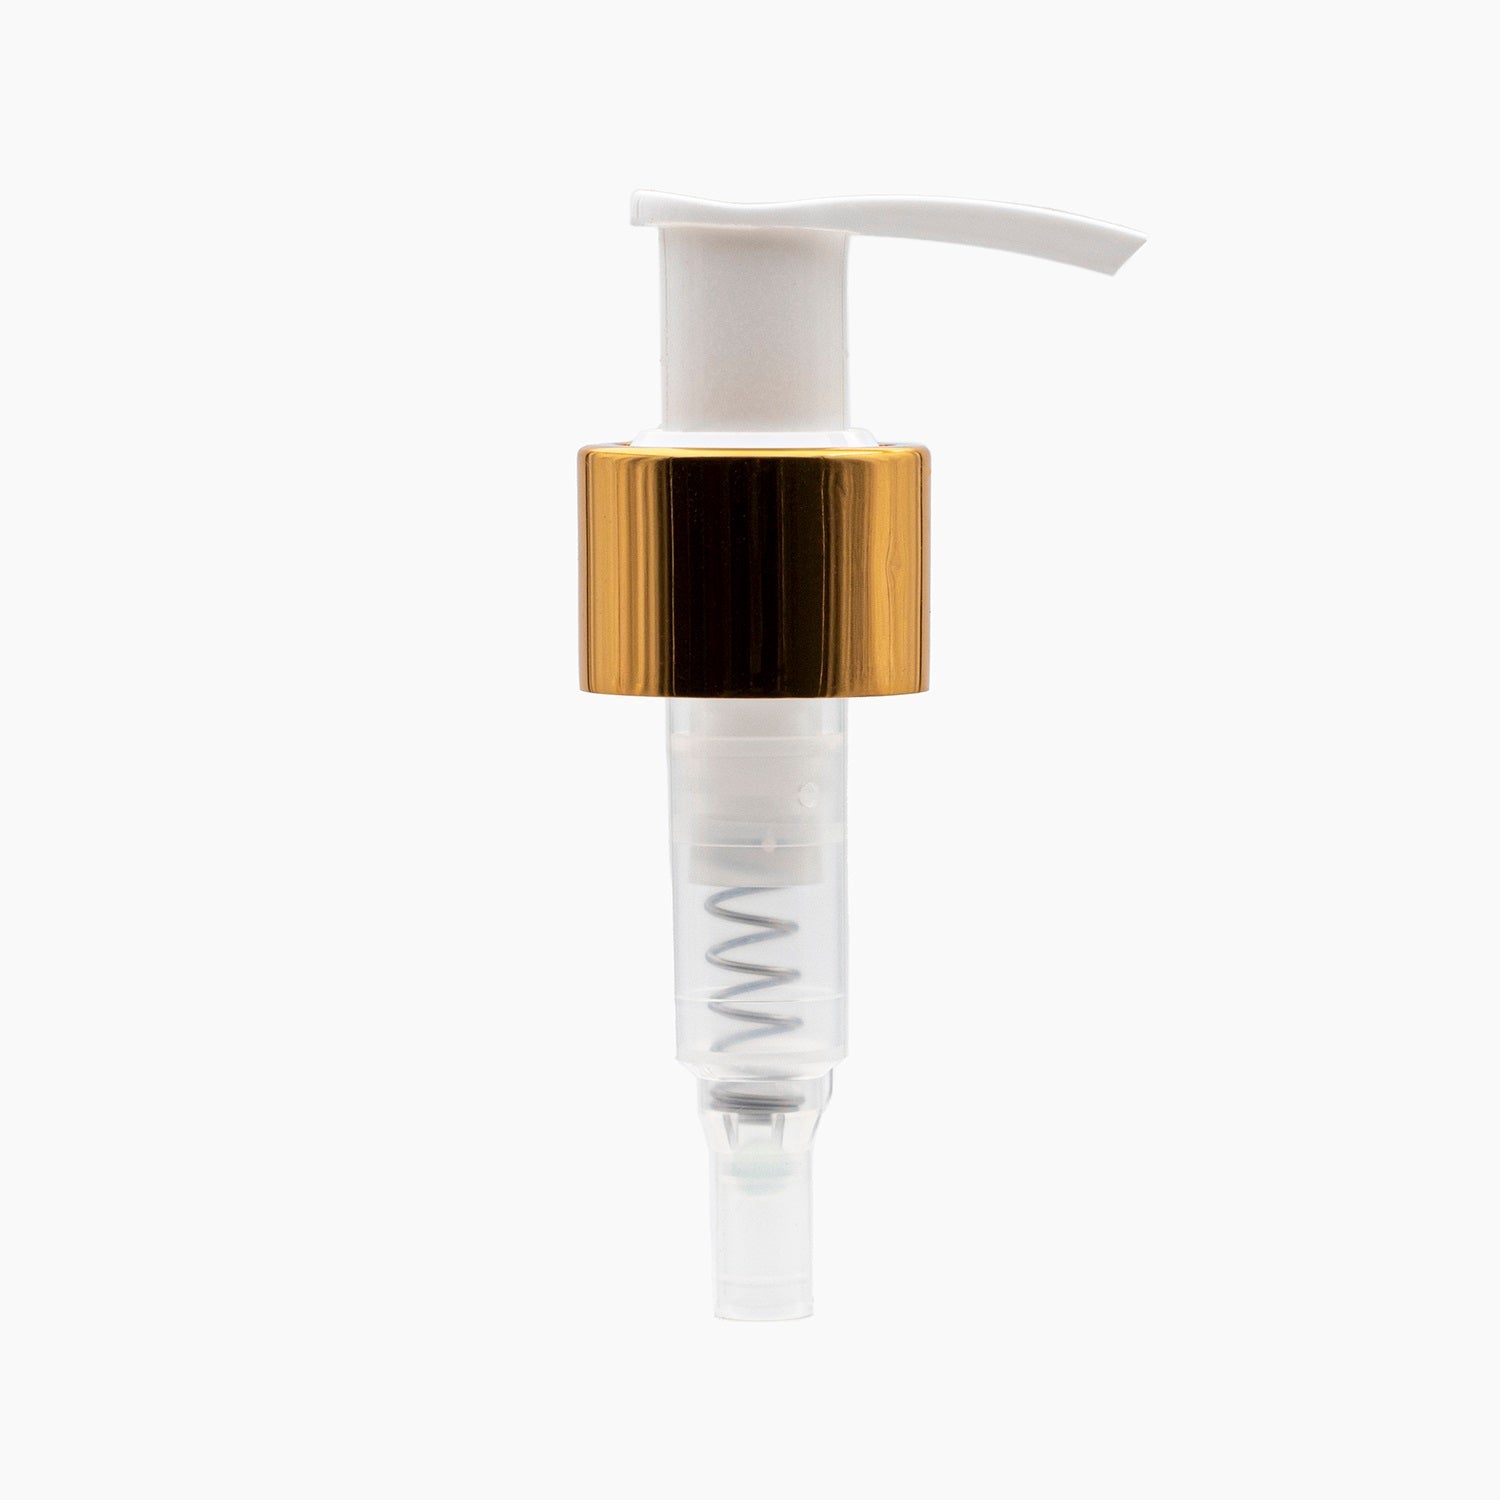 Gold Collar White 24mm Plastic Lotion Pump Cap On White Background | Brightpack Closures And Accessories